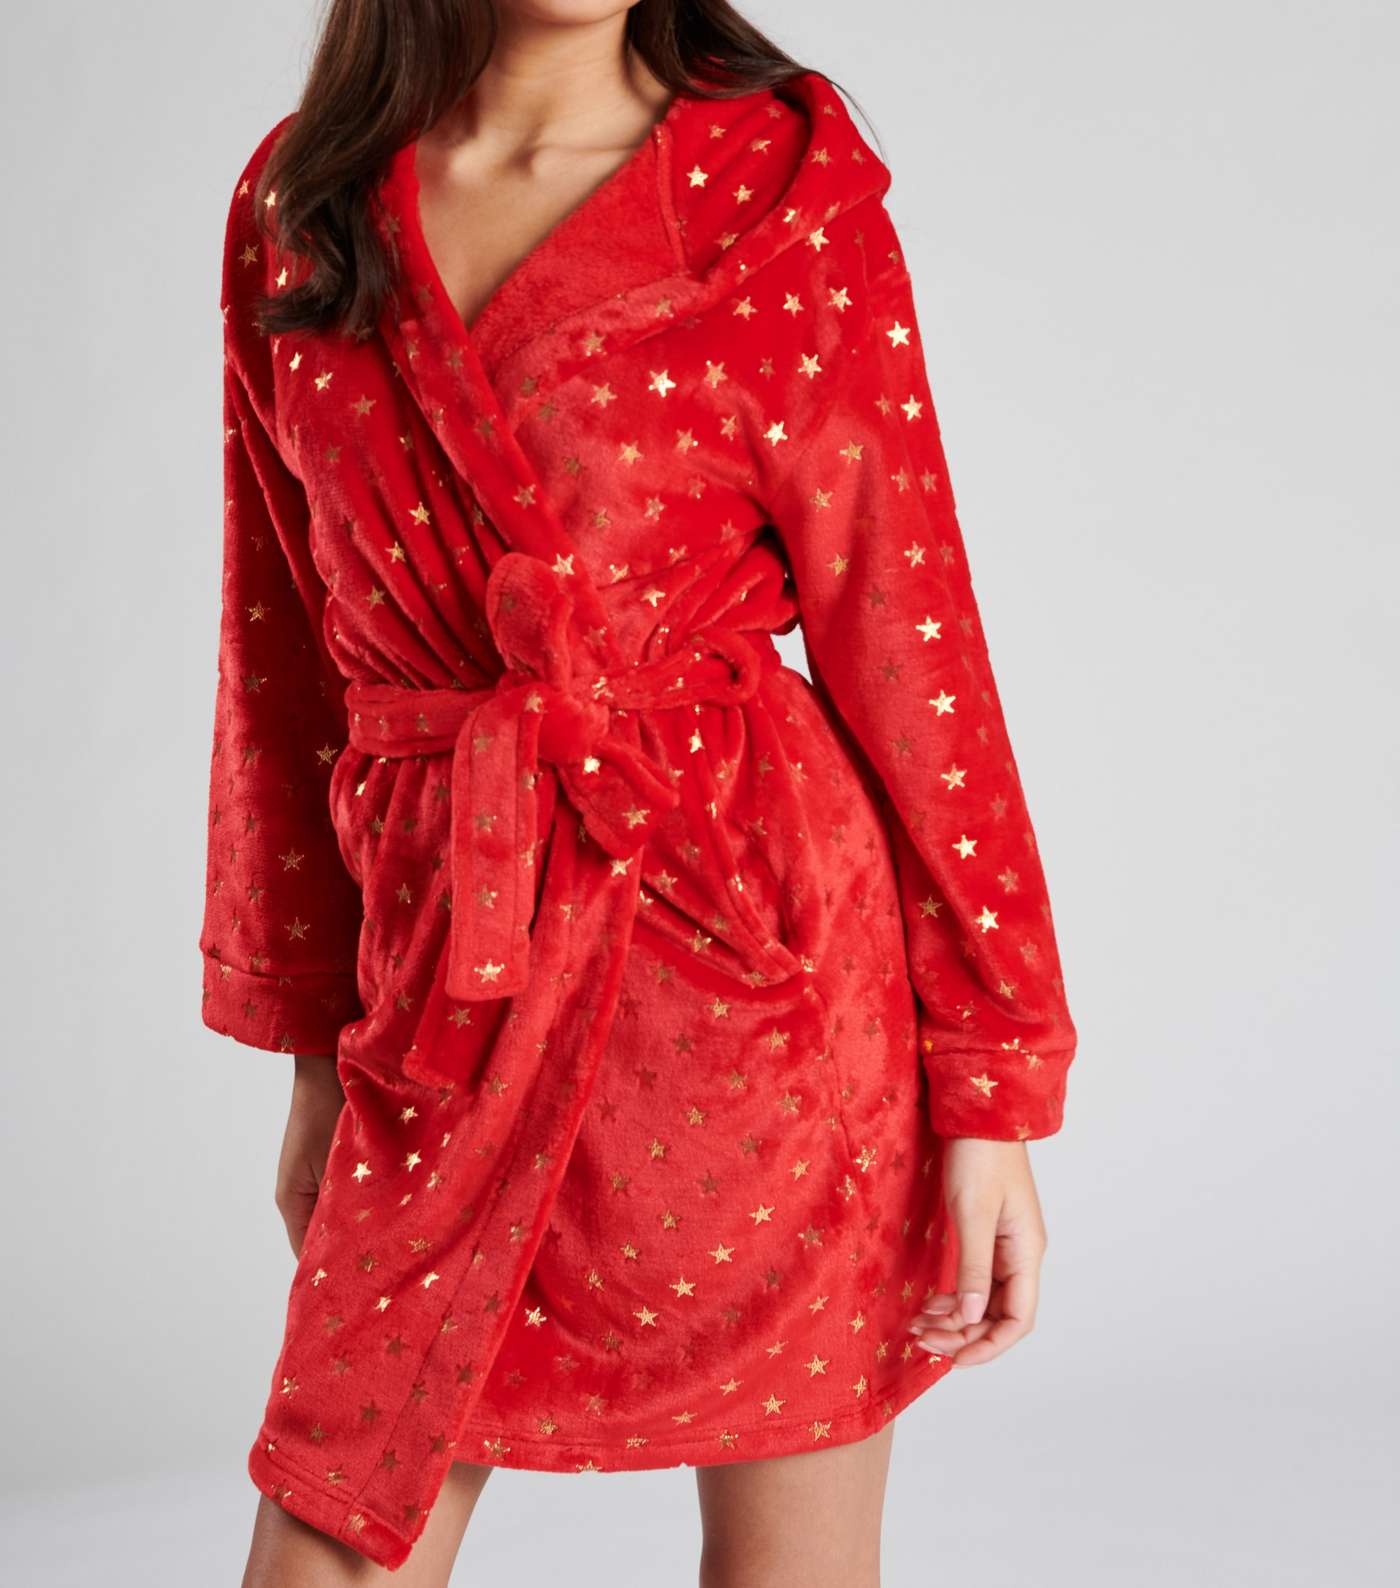 Loungeable Red Metallic Star Fleece Hooded Dressing Gown Image 5